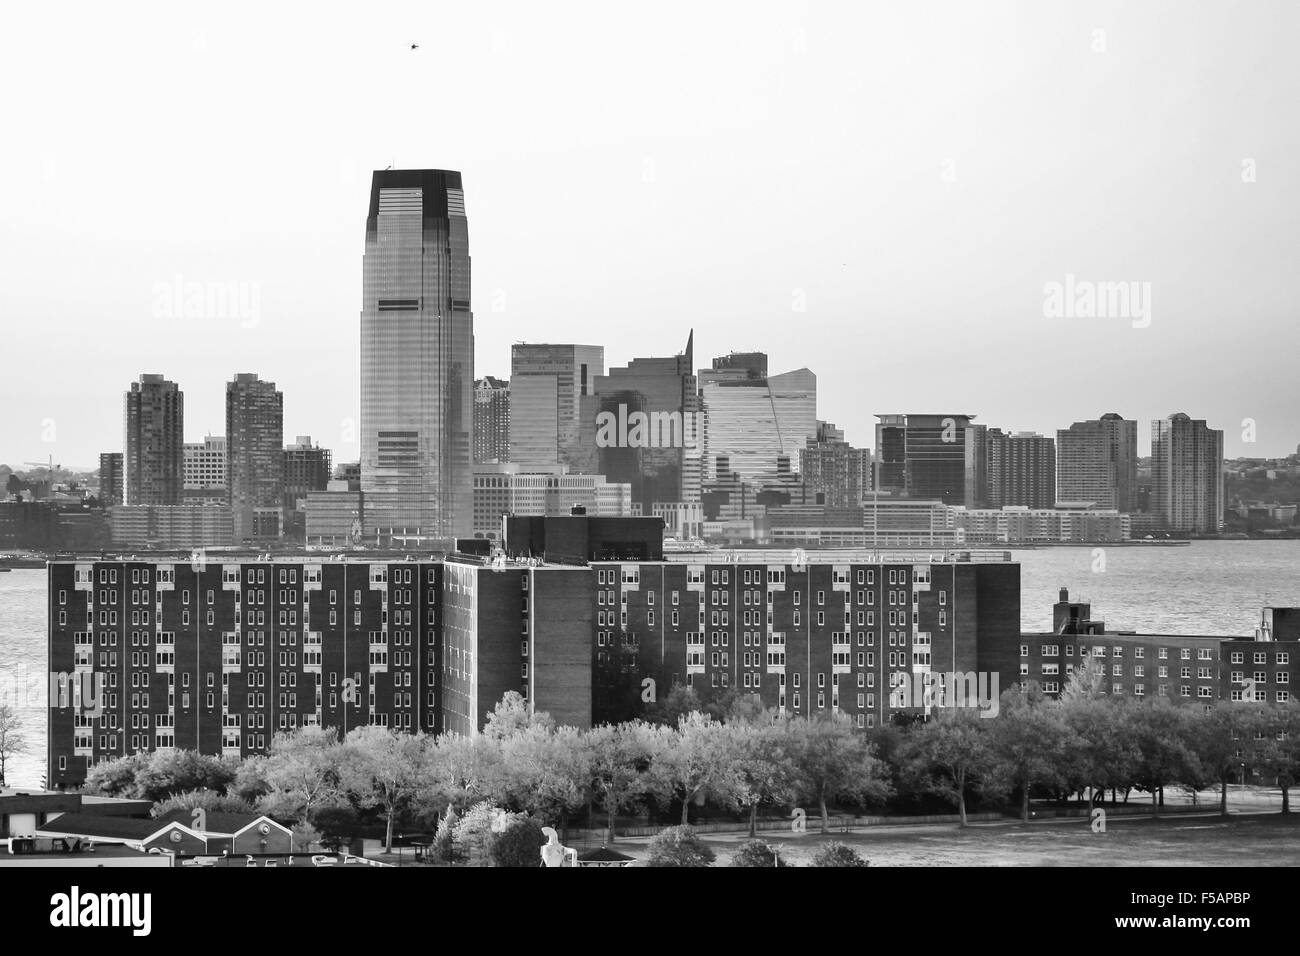 A view of 30 Hudson Street in Jersey City with the Governors island in the Upper New York Bay in New York City, USA. Stock Photo